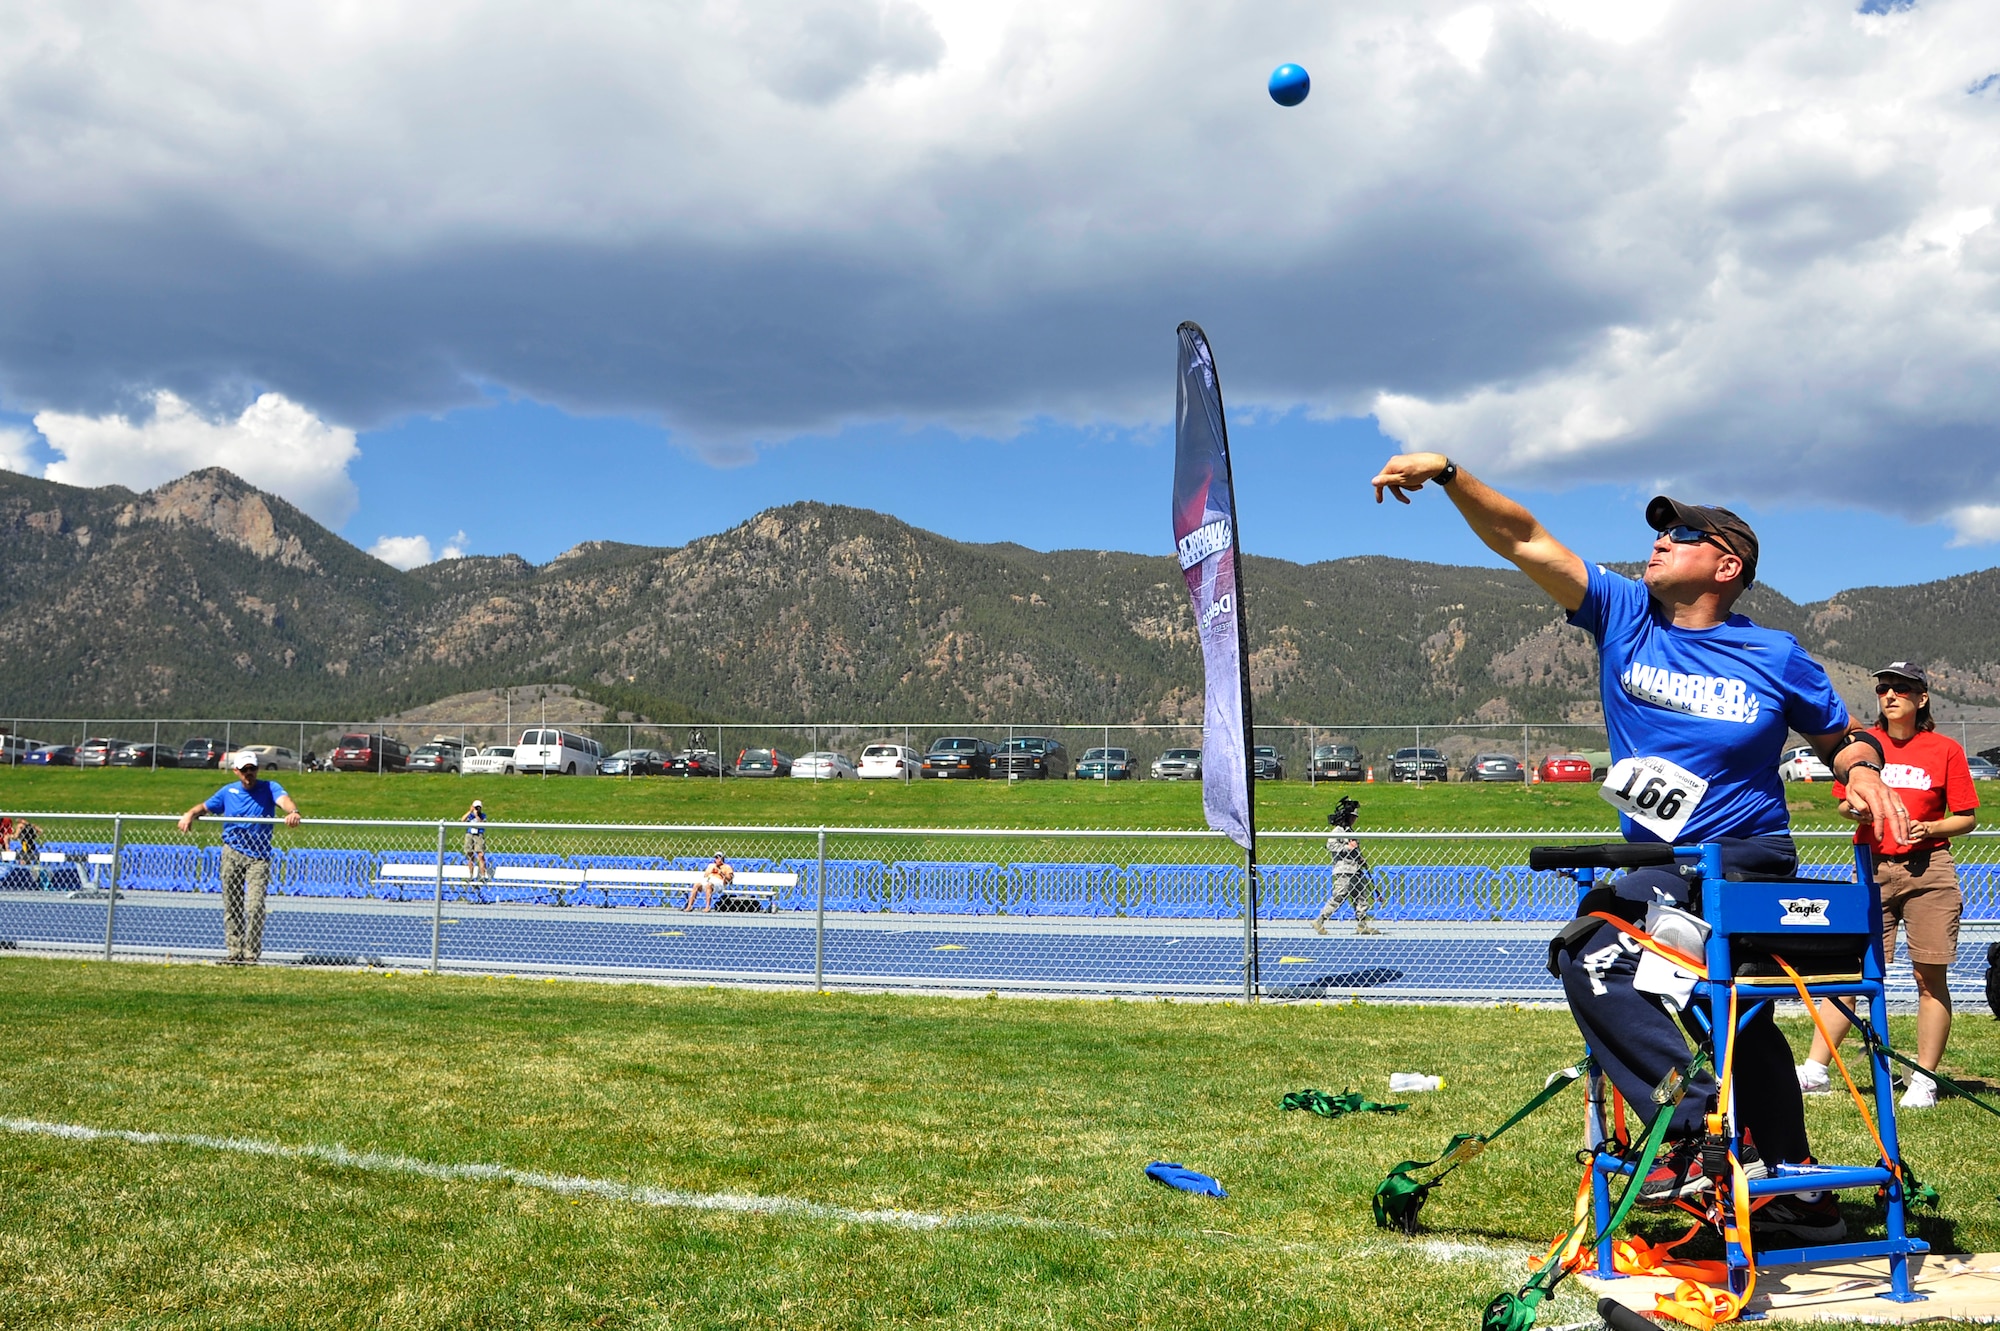 Retired Chief Master Sgt. Damian Orslene hurls a shot-put during the 2013 Warrior Games at the U.S. Air Force Academy May 14, Colorado Springs, Colo. The Warrior Games enable service members and veterans who are injured or ill to compete in a variety of Paralympic sports. (U.S. Air Force photo by Staff Sgt. Christopher Boitz/Released)